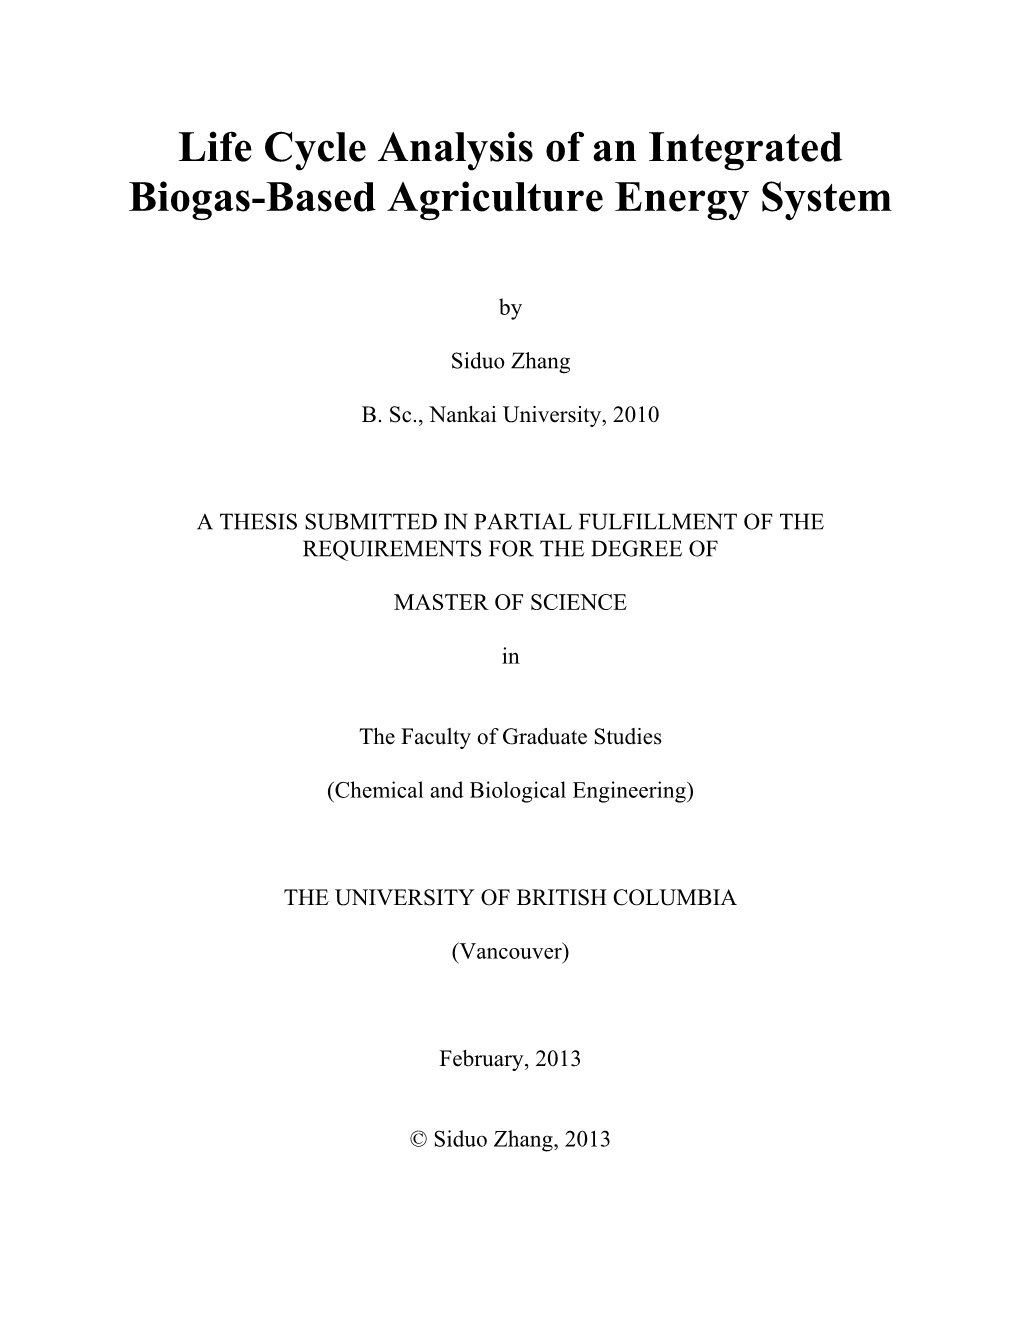 Life Cycle Analysis of an Integrated Biogas-Based Agriculture Energy